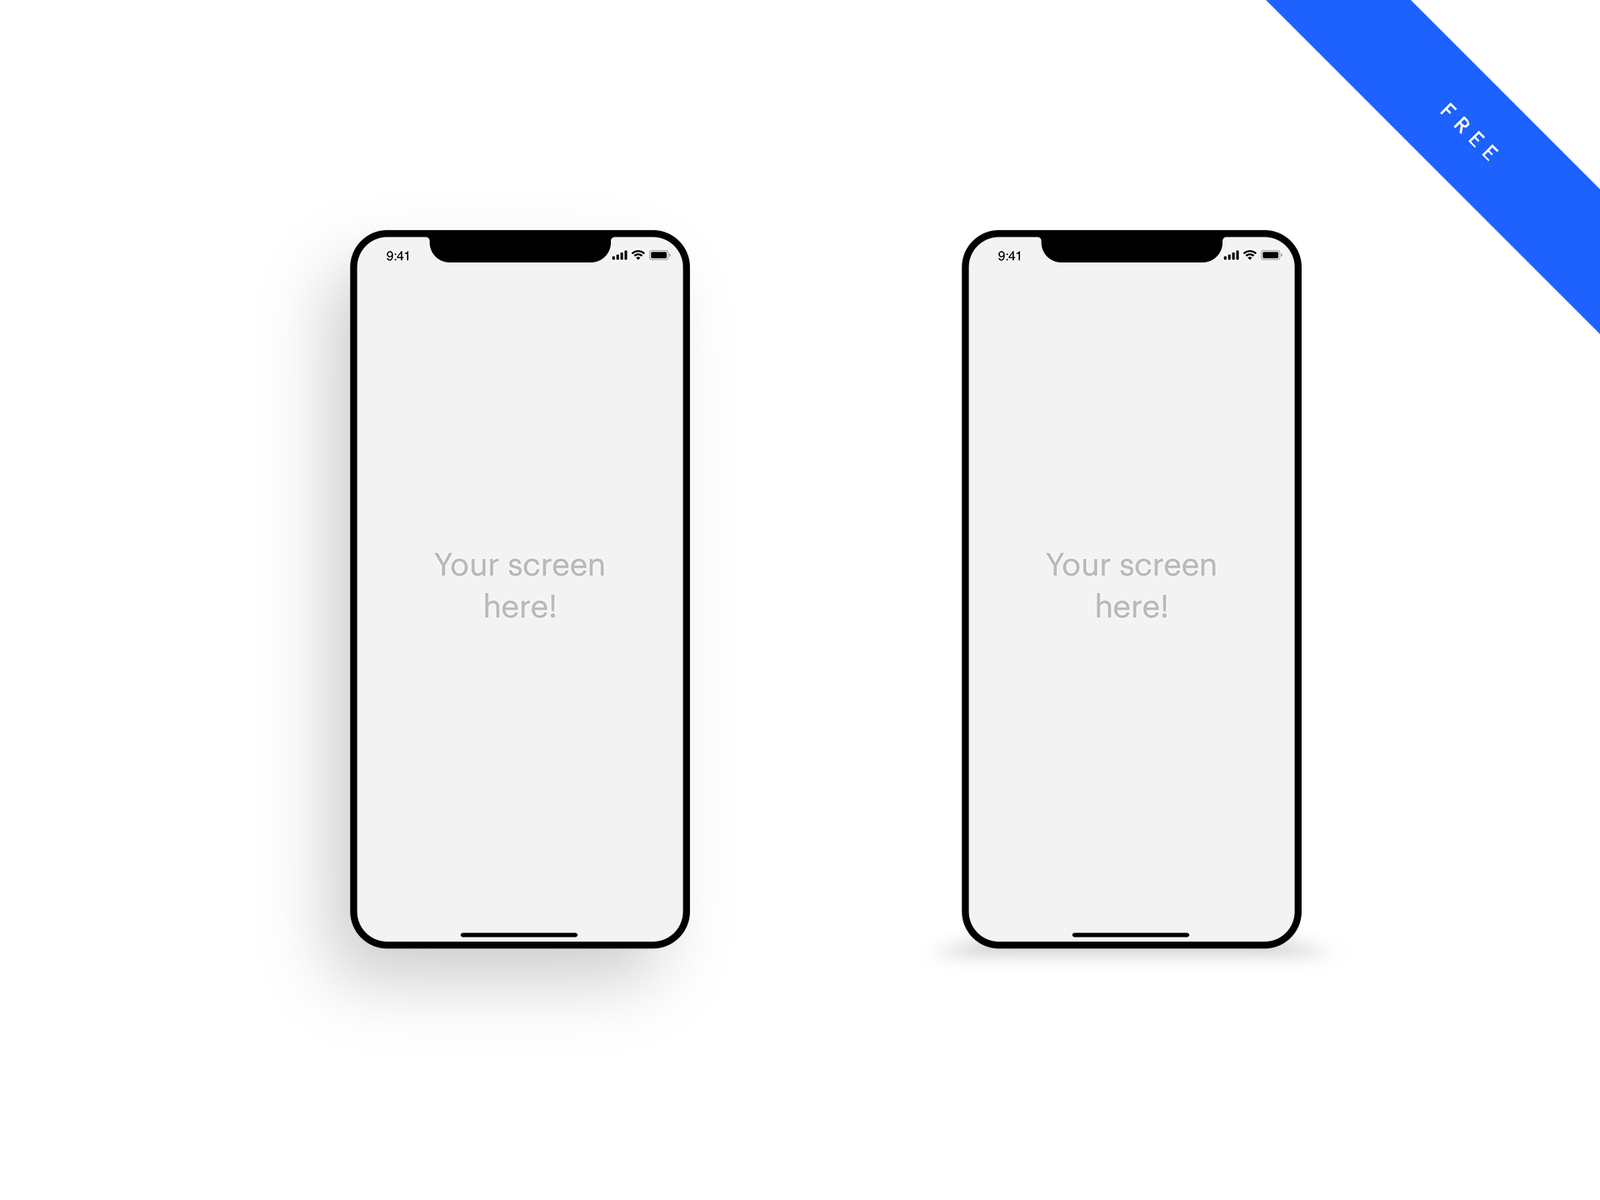 Iphone Mockup by Pablo Chico on Dribbble